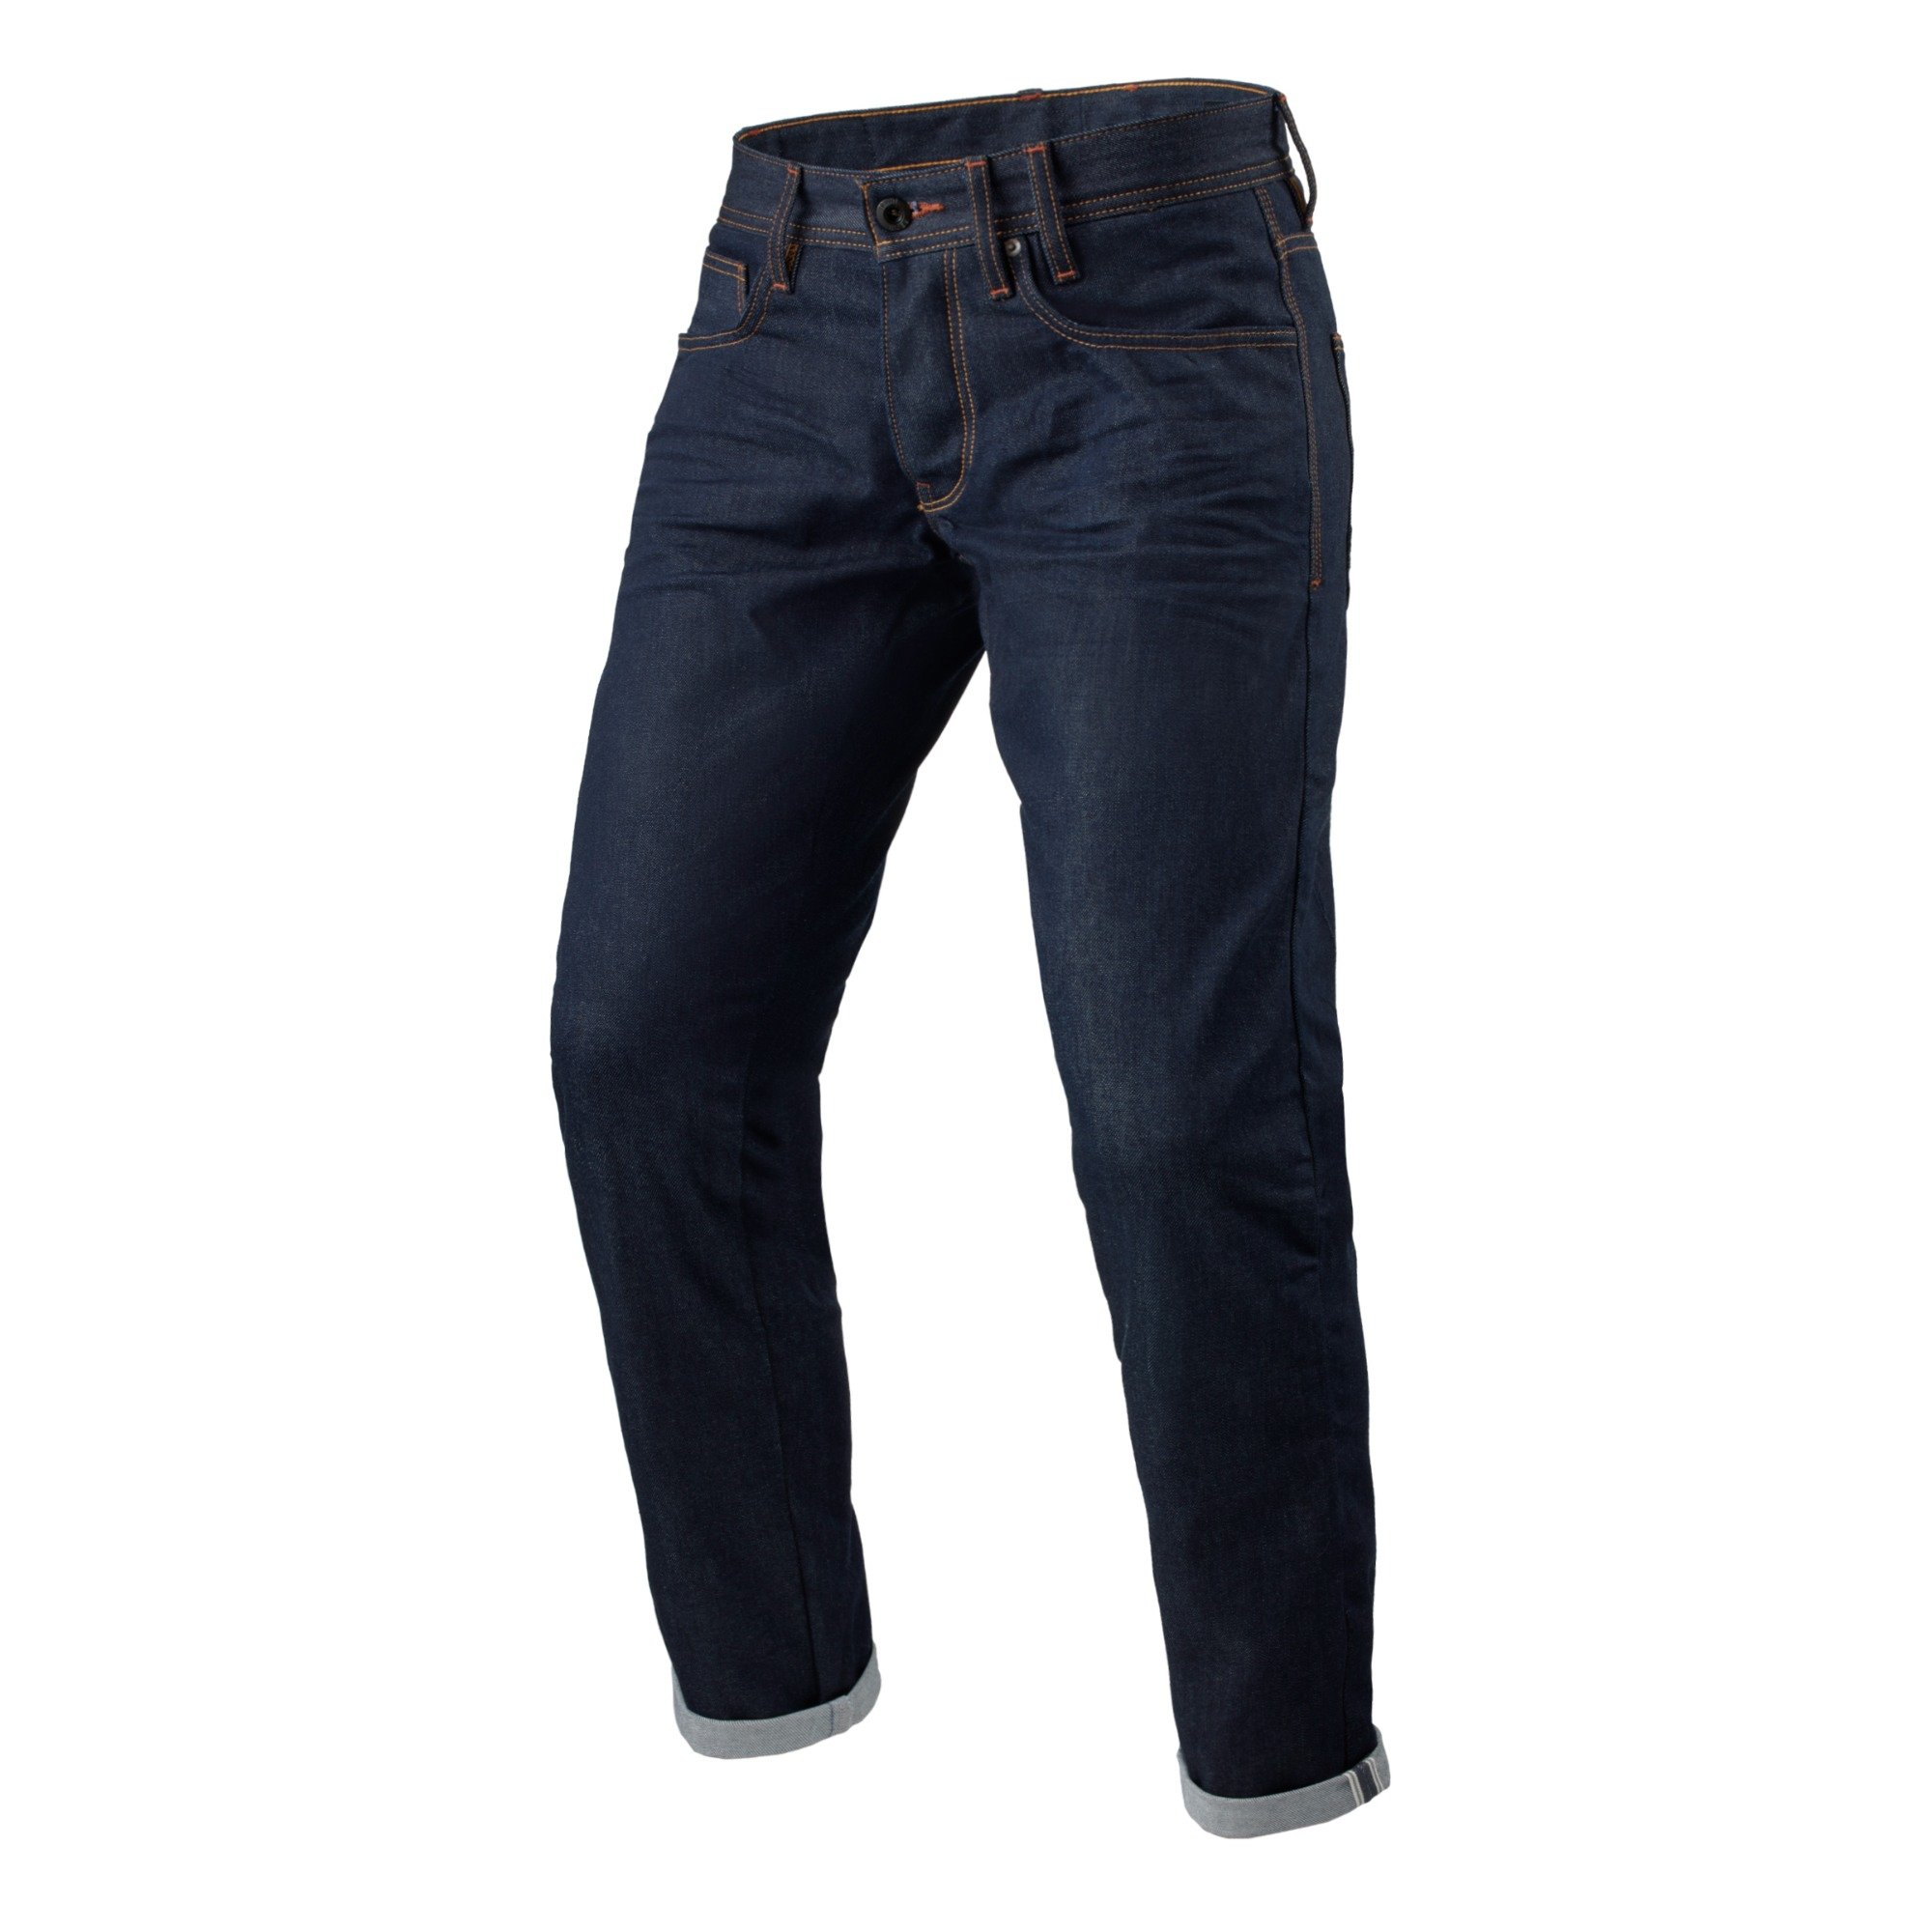 Image of REV'IT! Jeans Lewis Selvedge TF Dark Blue L34 Motorcycle Pants Size L34/W31 ID 8700001357951